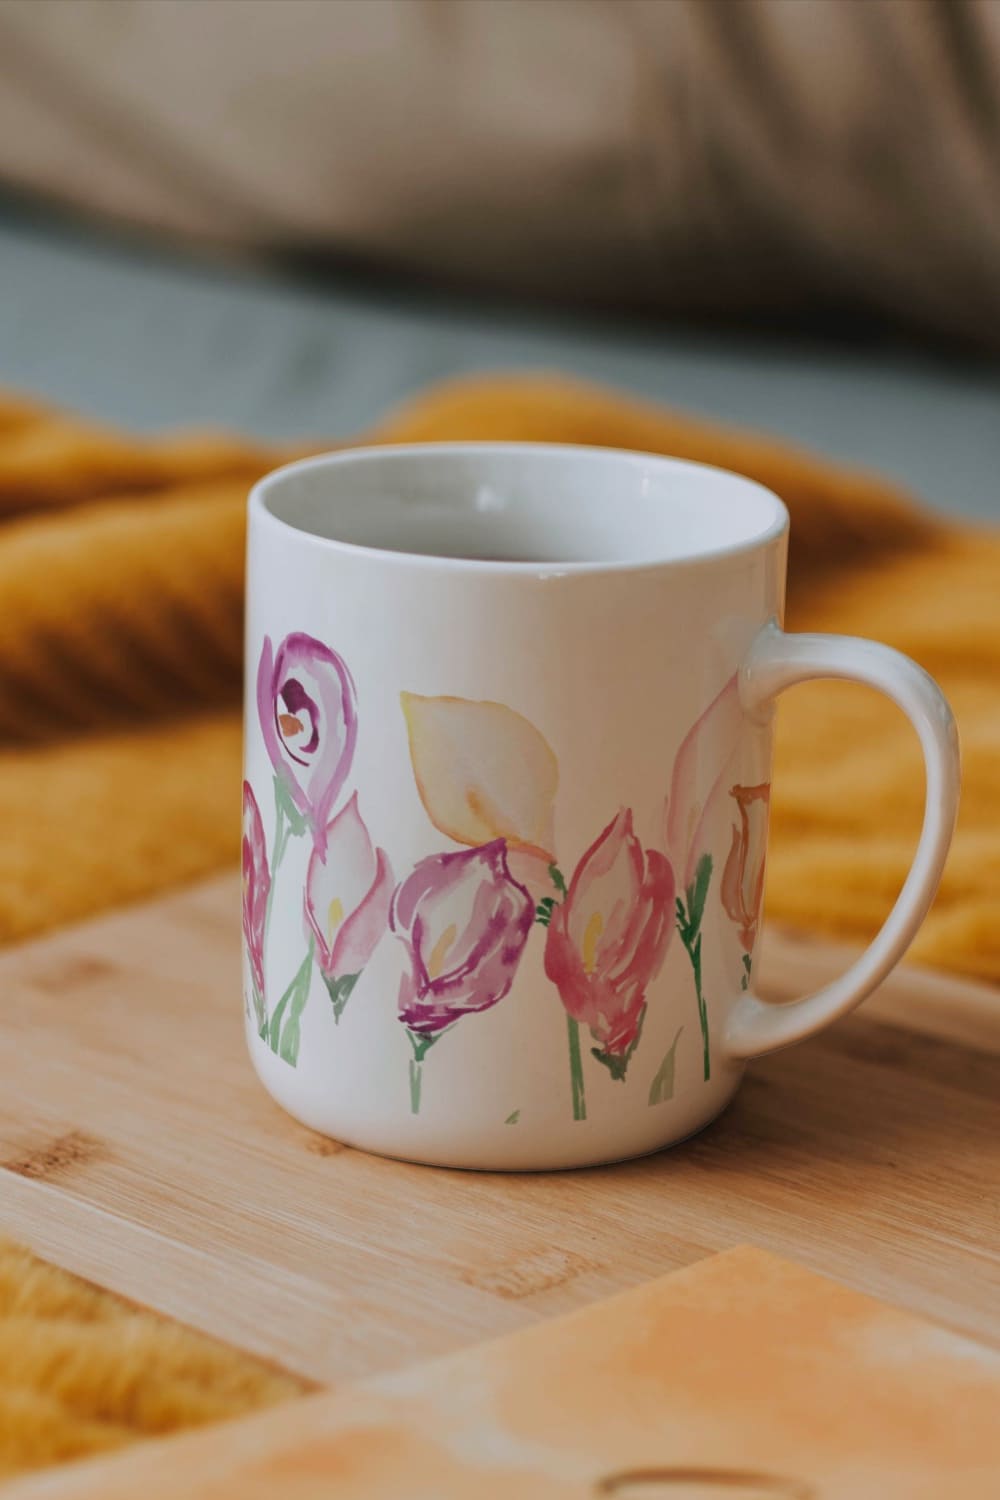 Tender lilies print for a cup.